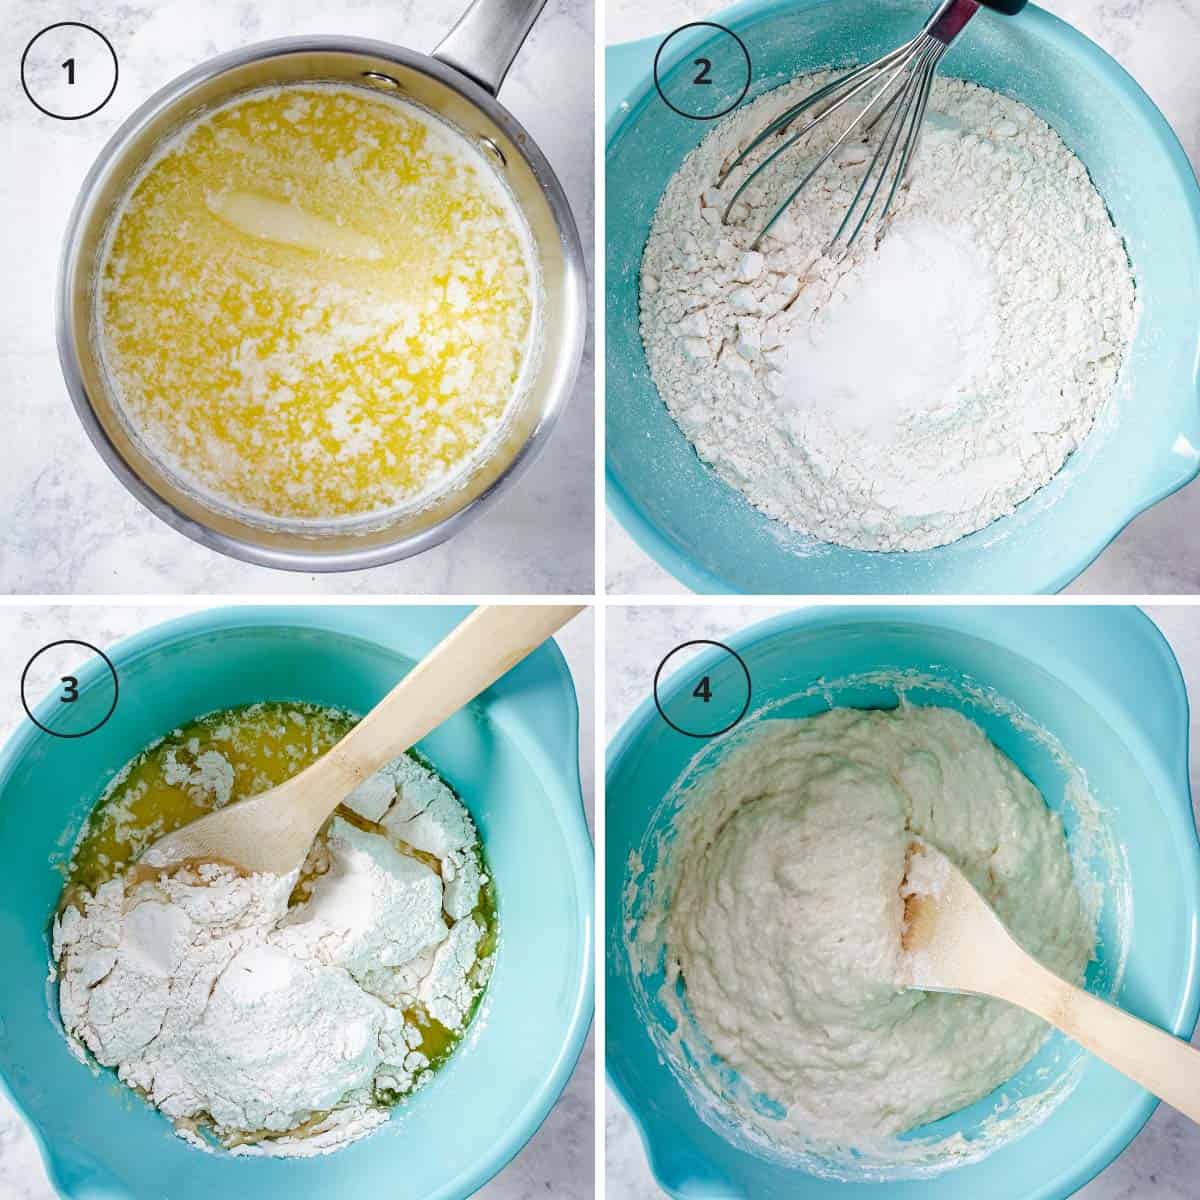 Four steps to mixing ingredients for bread dough.